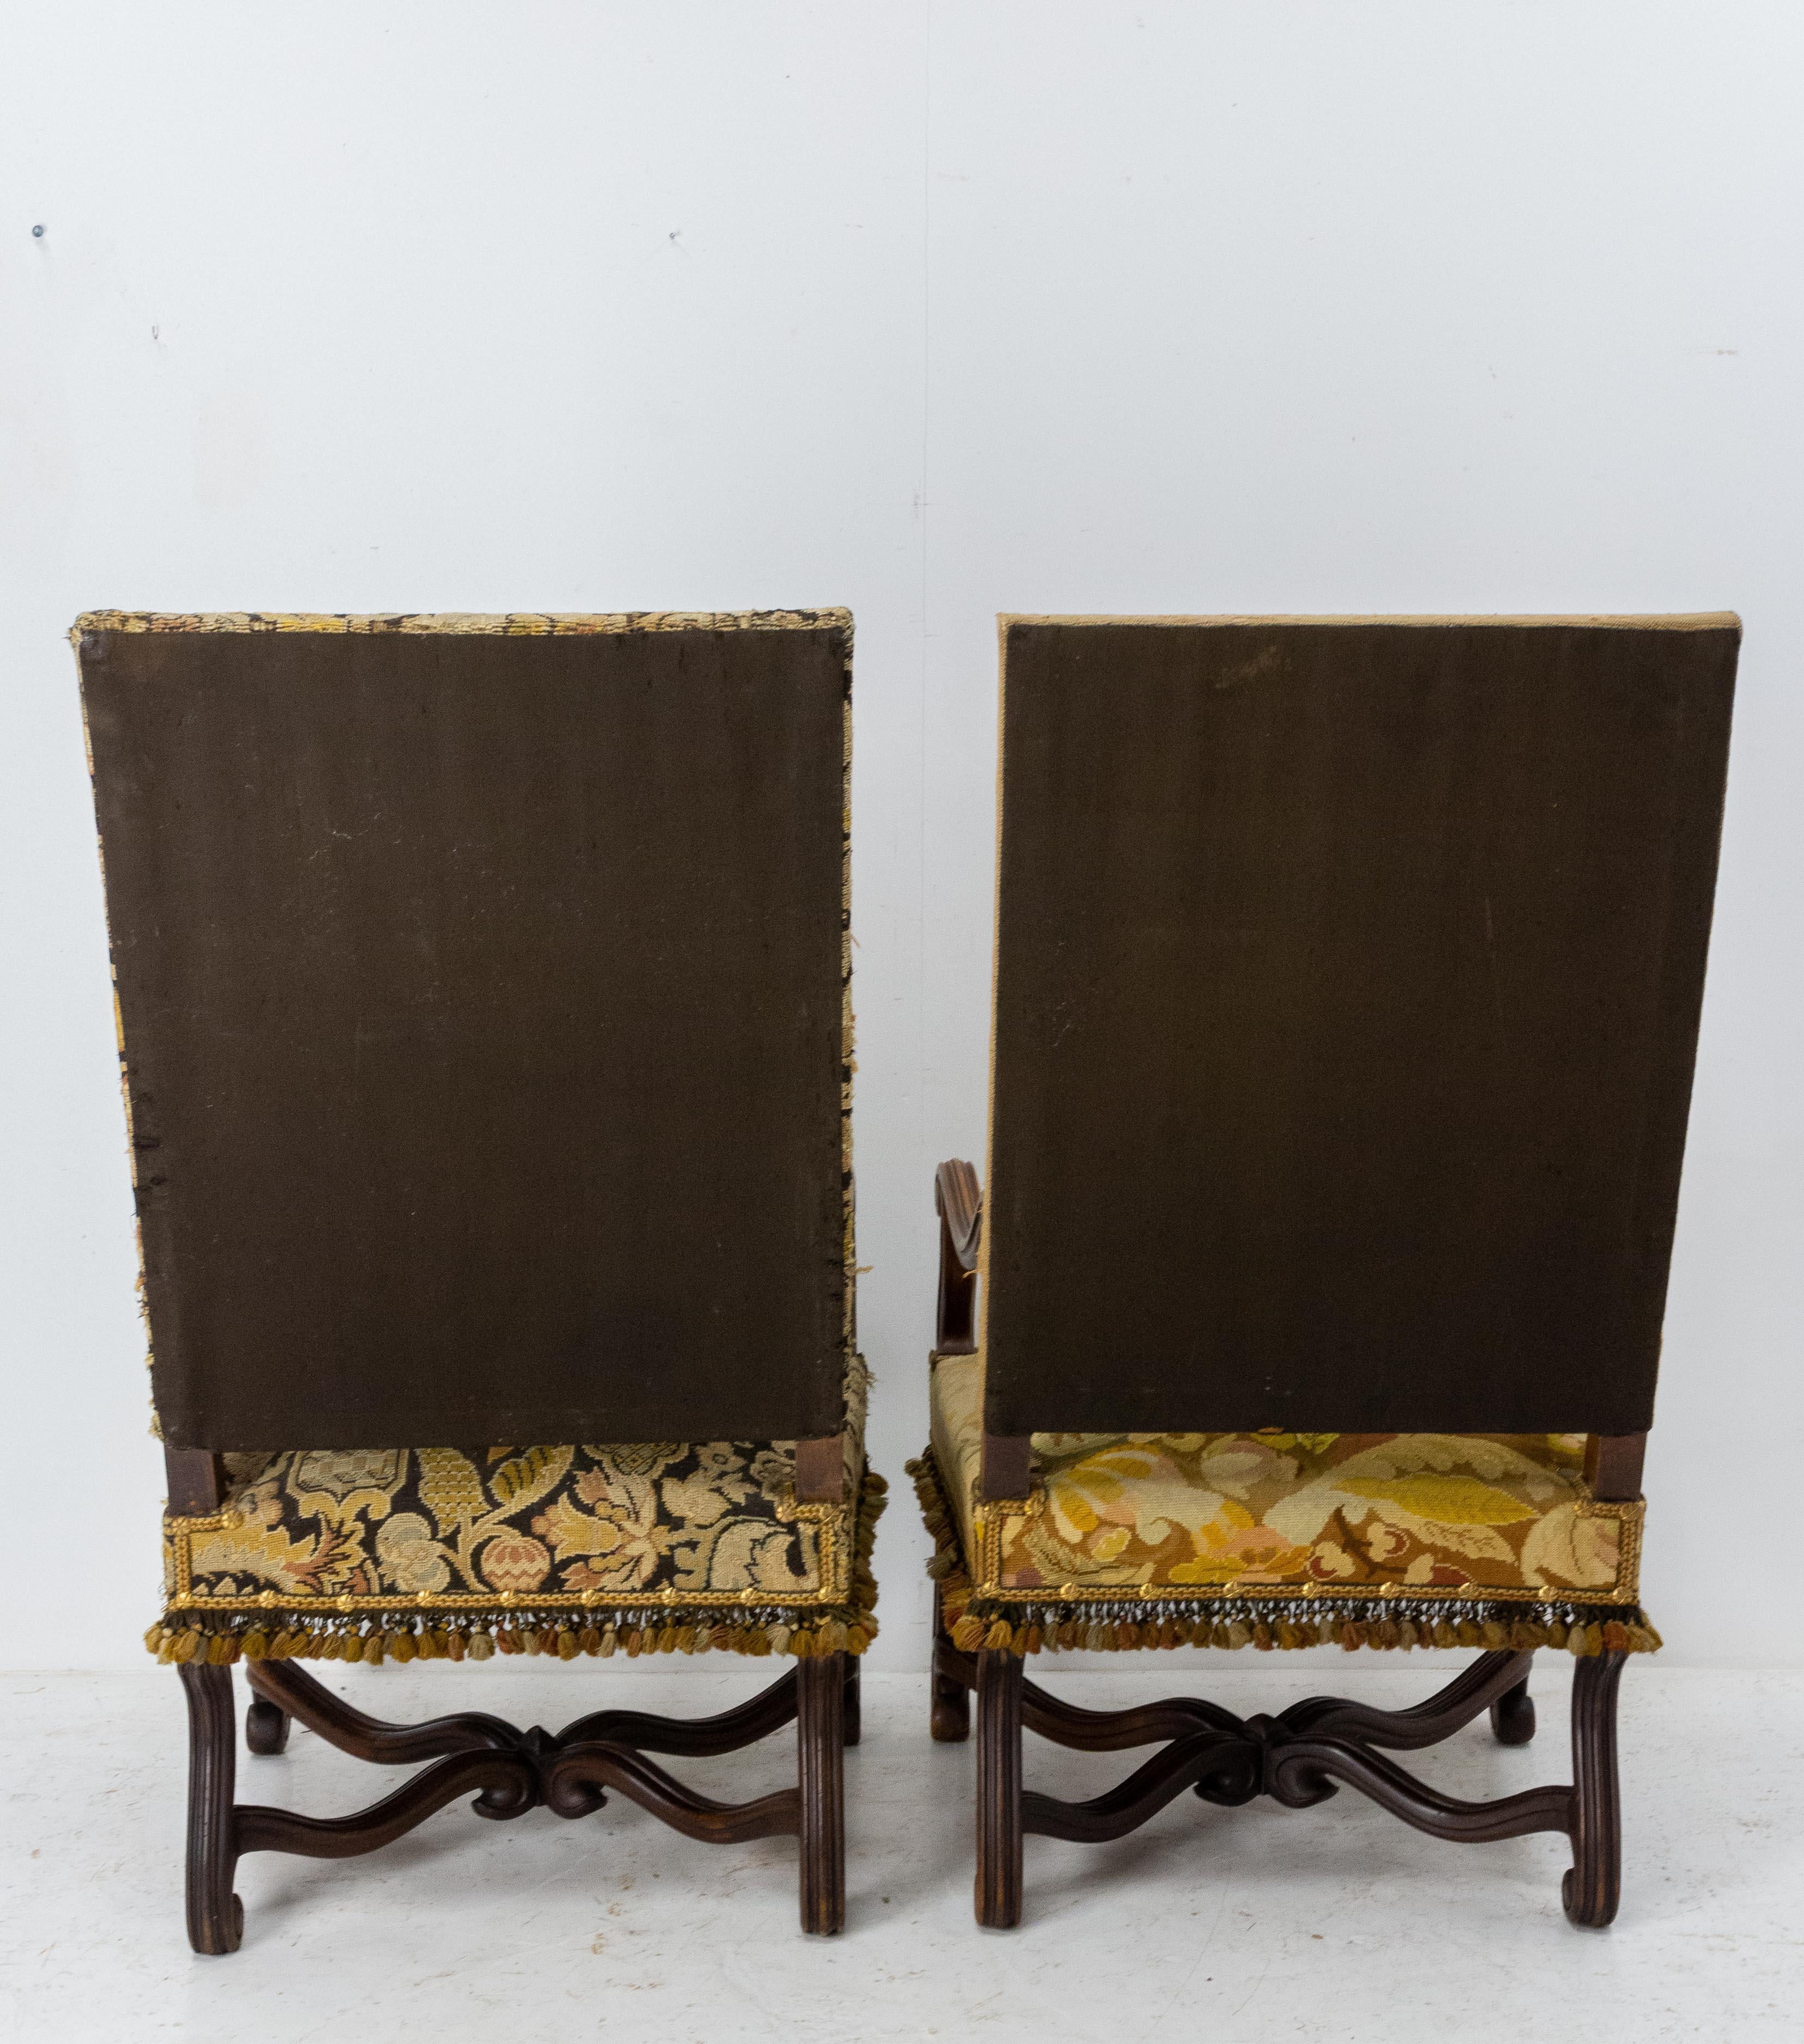 Pair of Louis XIII Revival Open Armchairs French, Late 19th Century to Recover For Sale 1